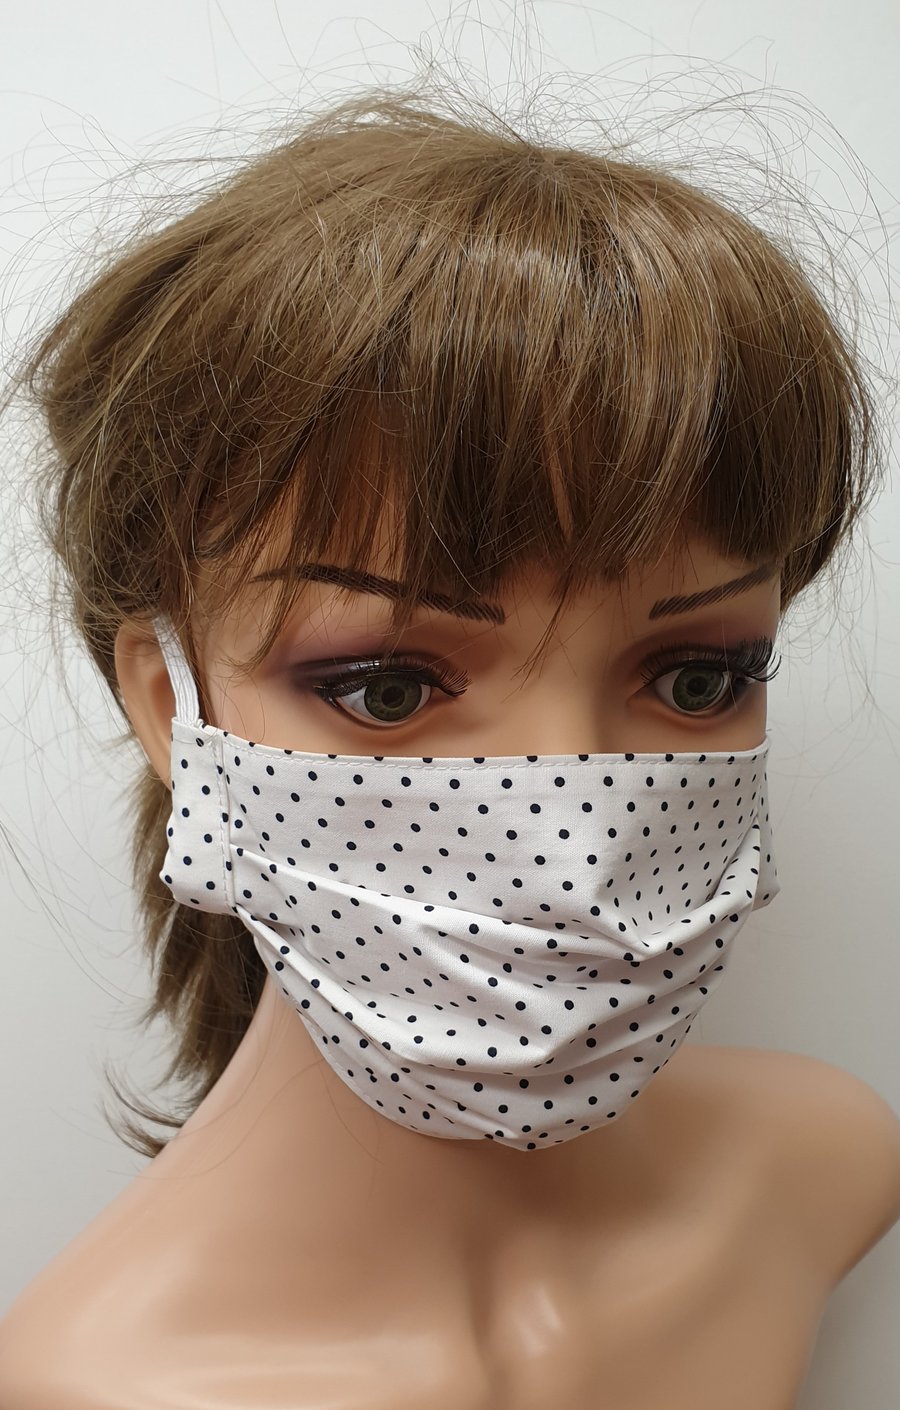 Women dotted face mask reusable washable face covering